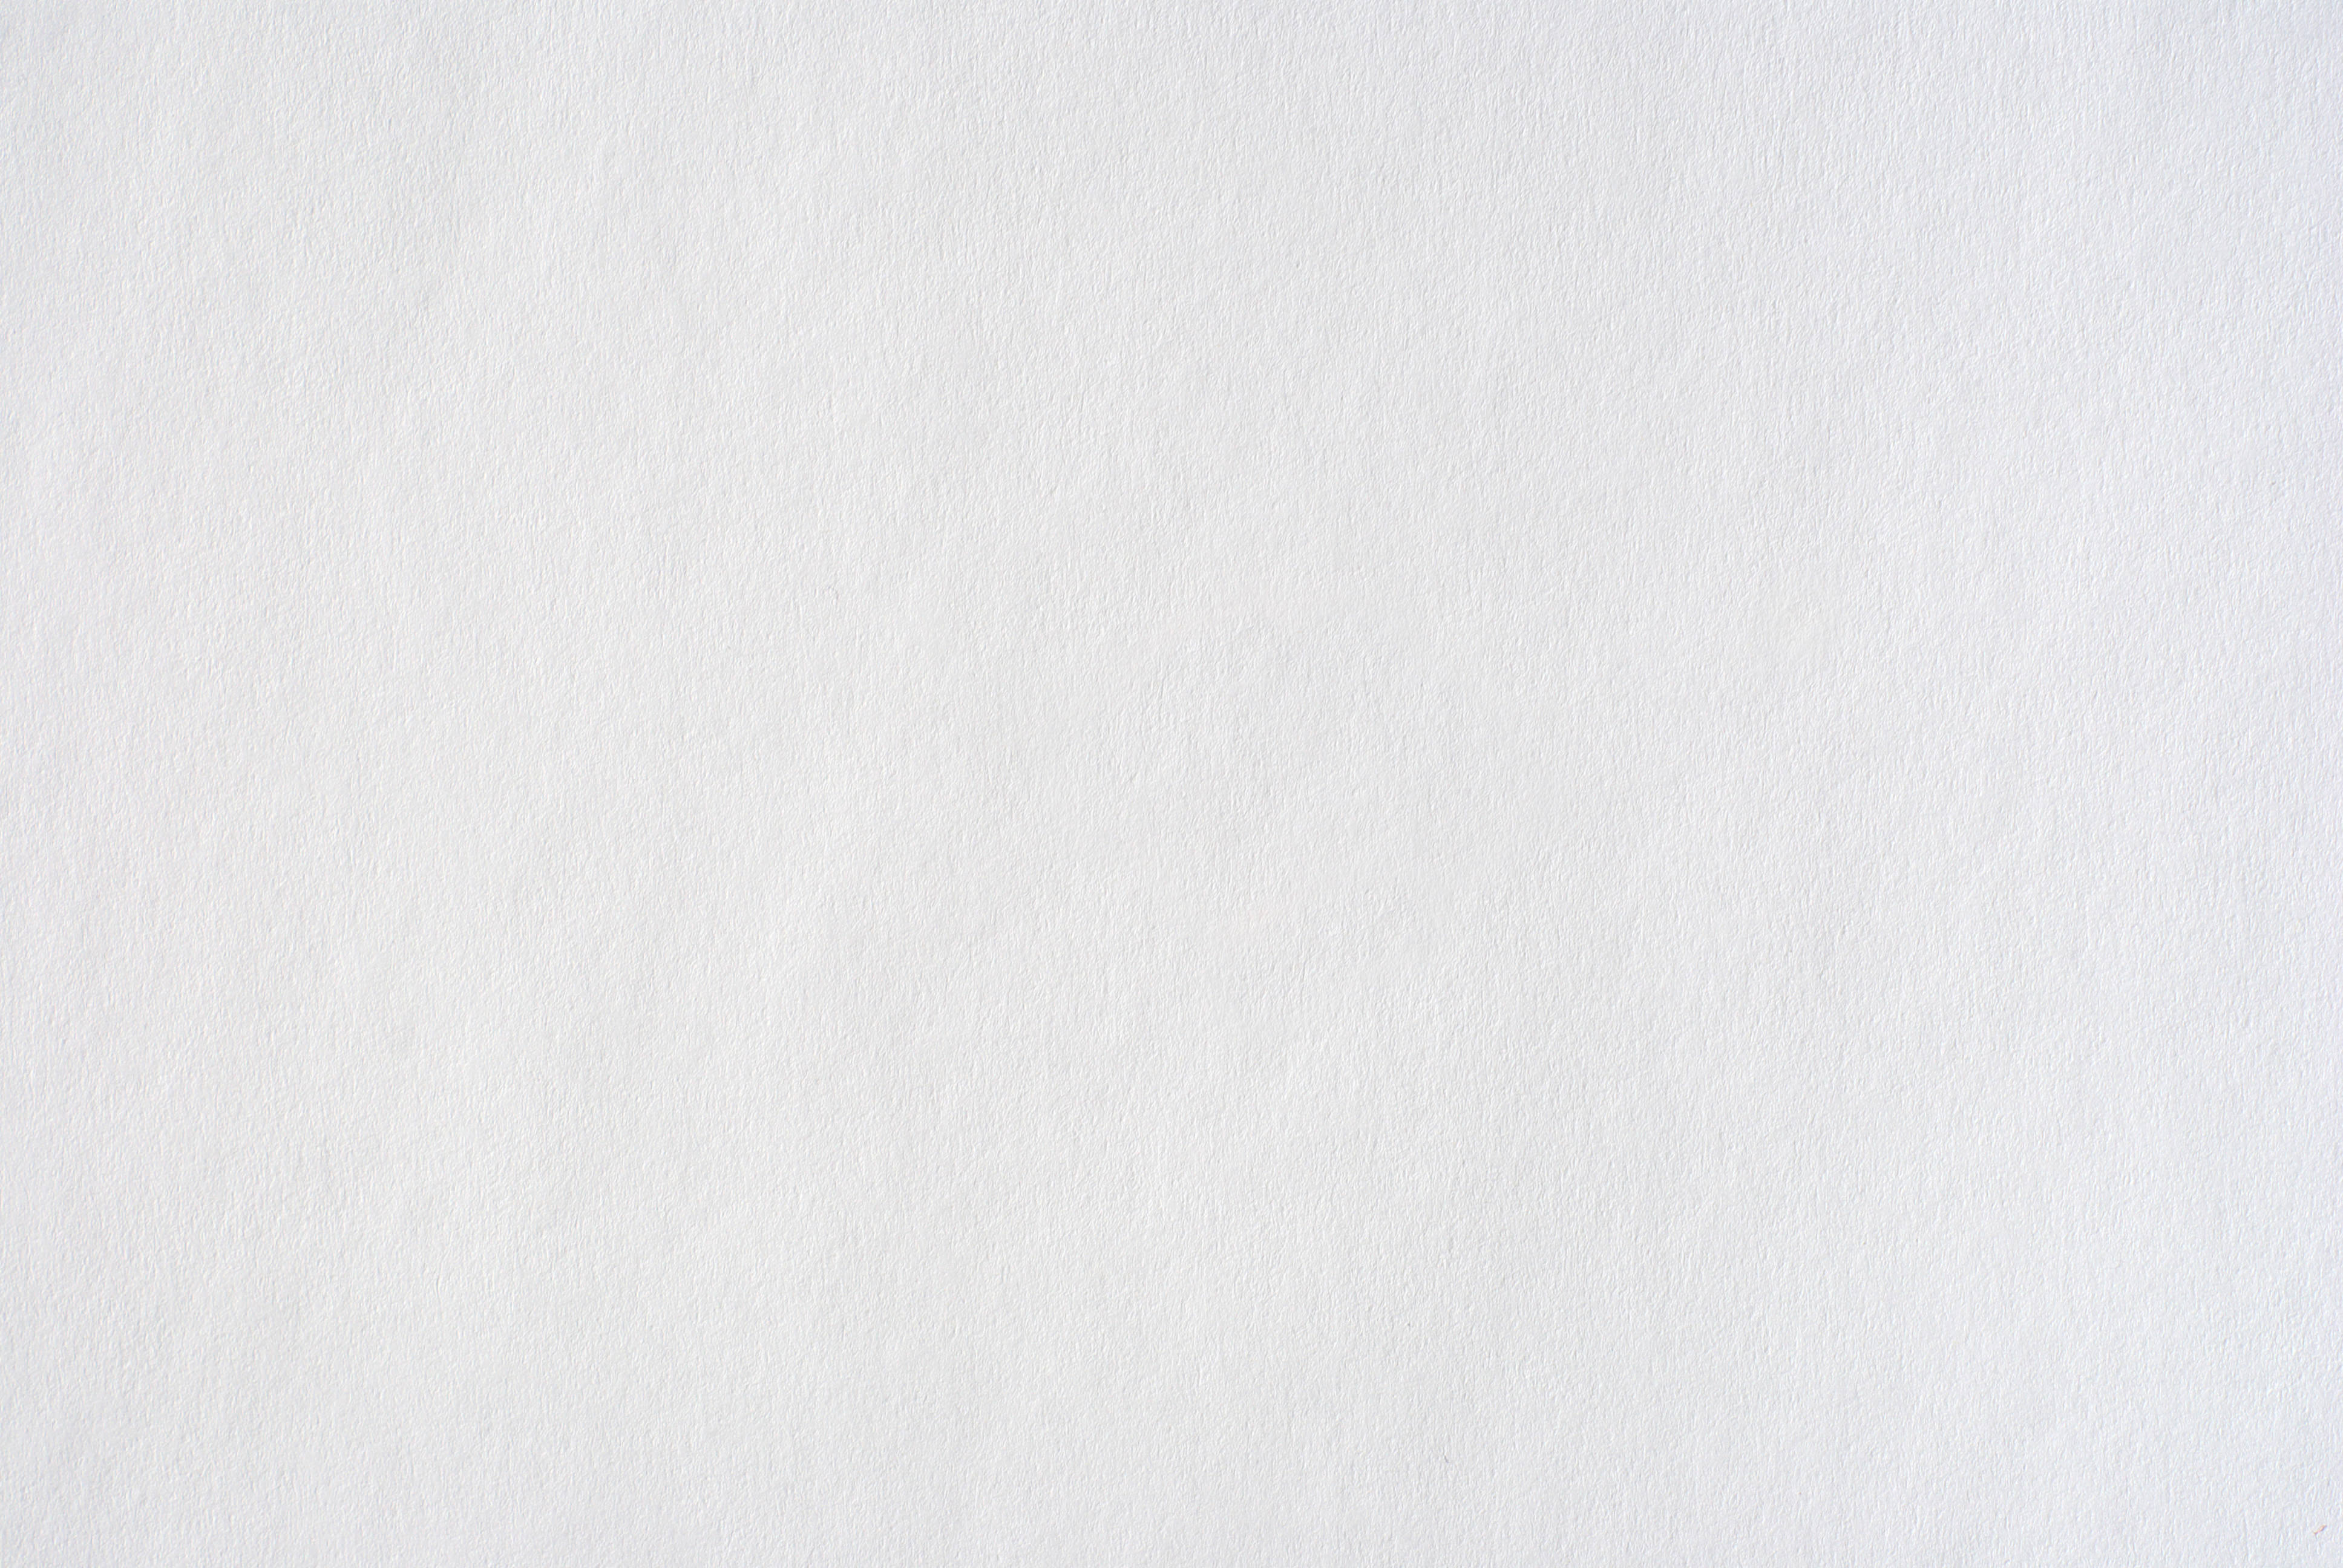 001_paper_2872x2592_all free download